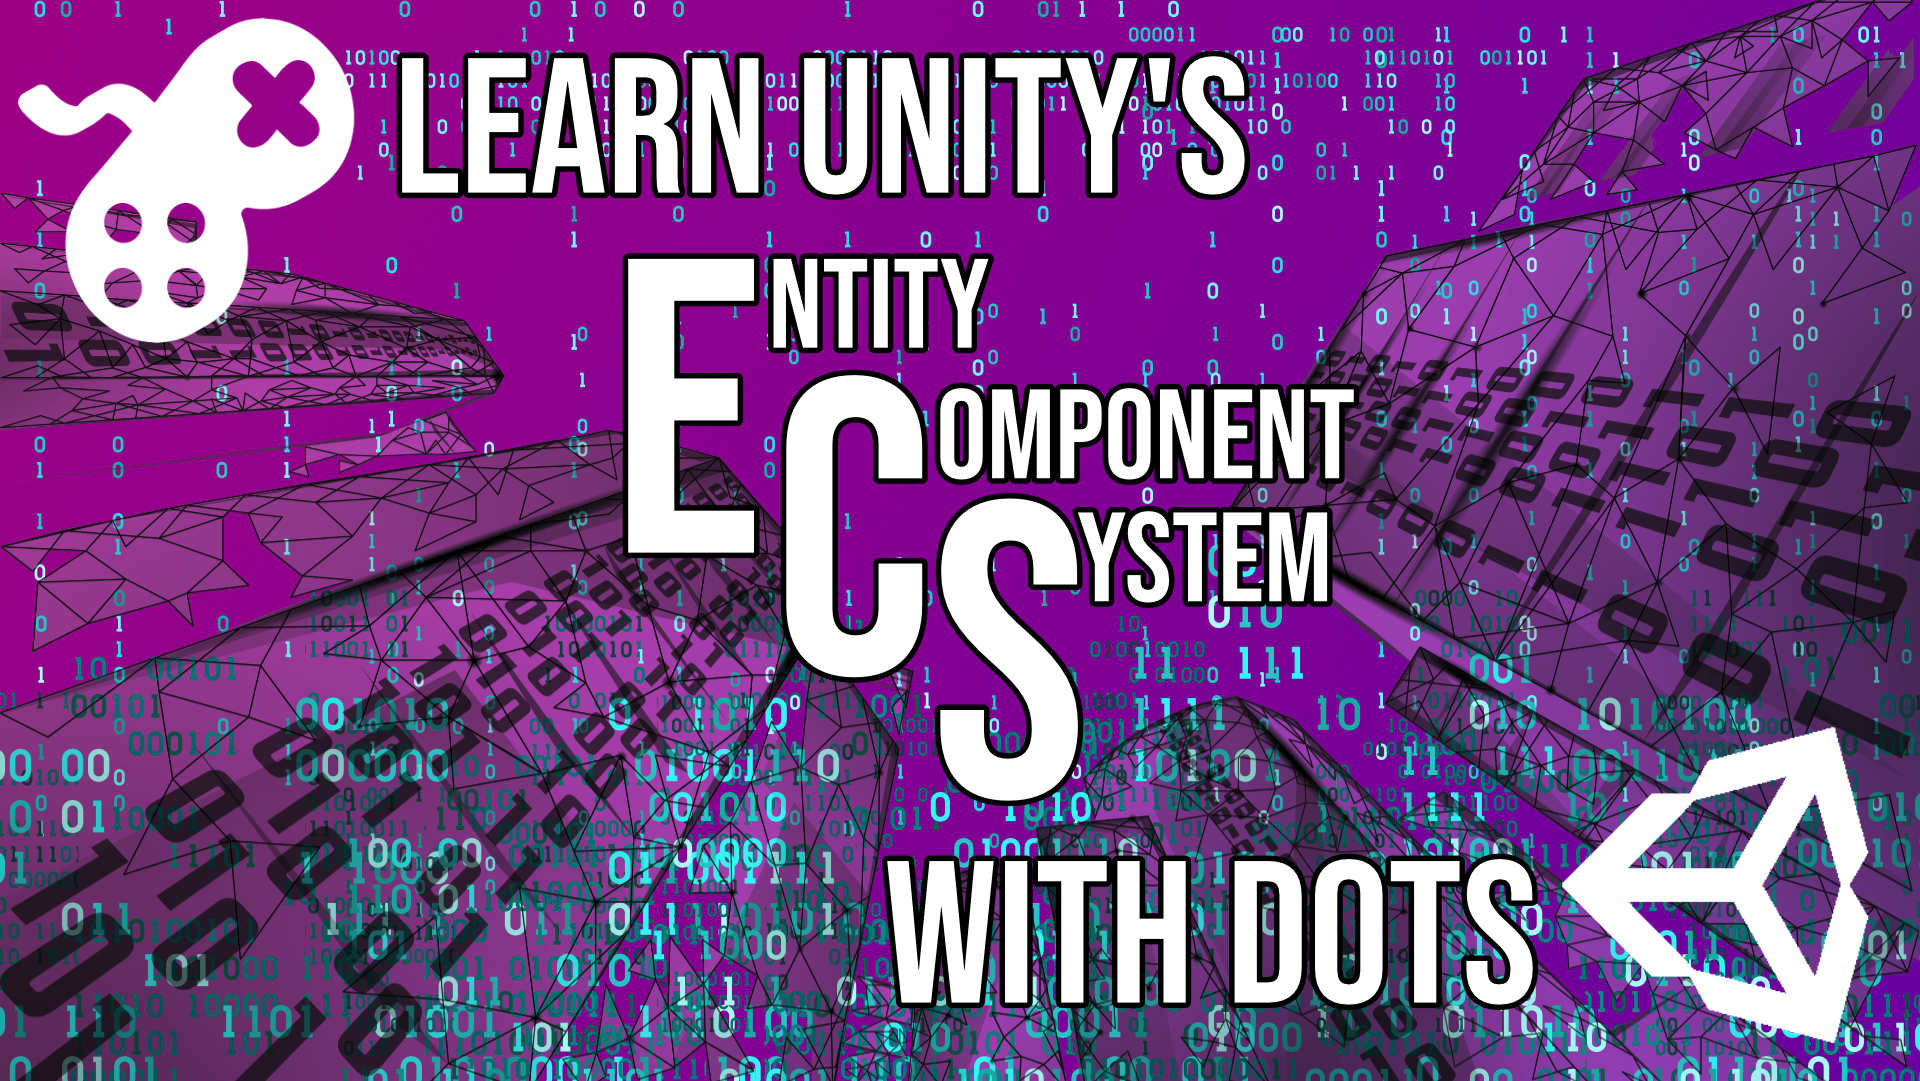 Learn Unity’s Entity Component System with DOTS